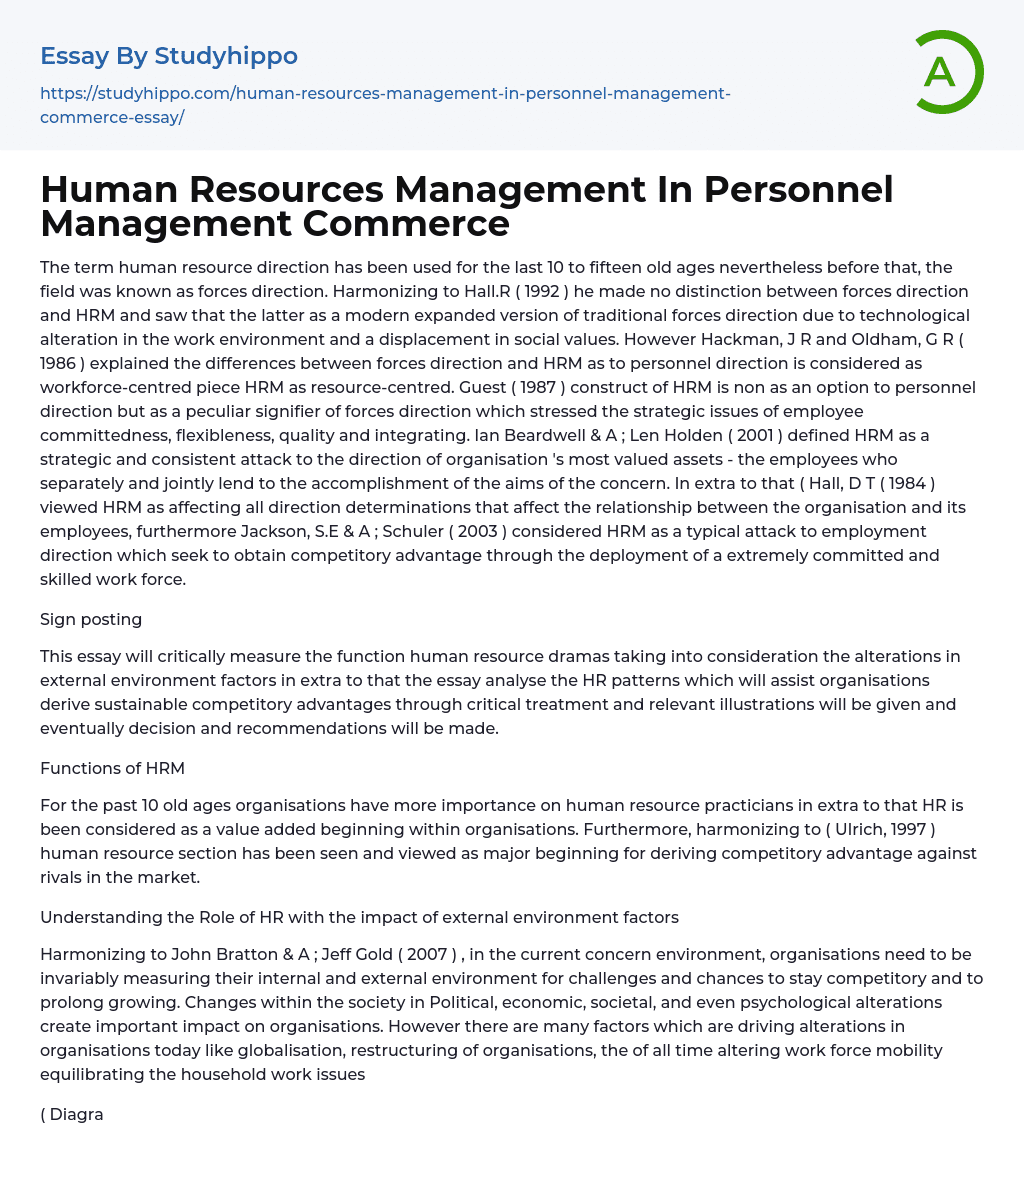 Human Resources Management In Personnel Management Commerce Essay Example